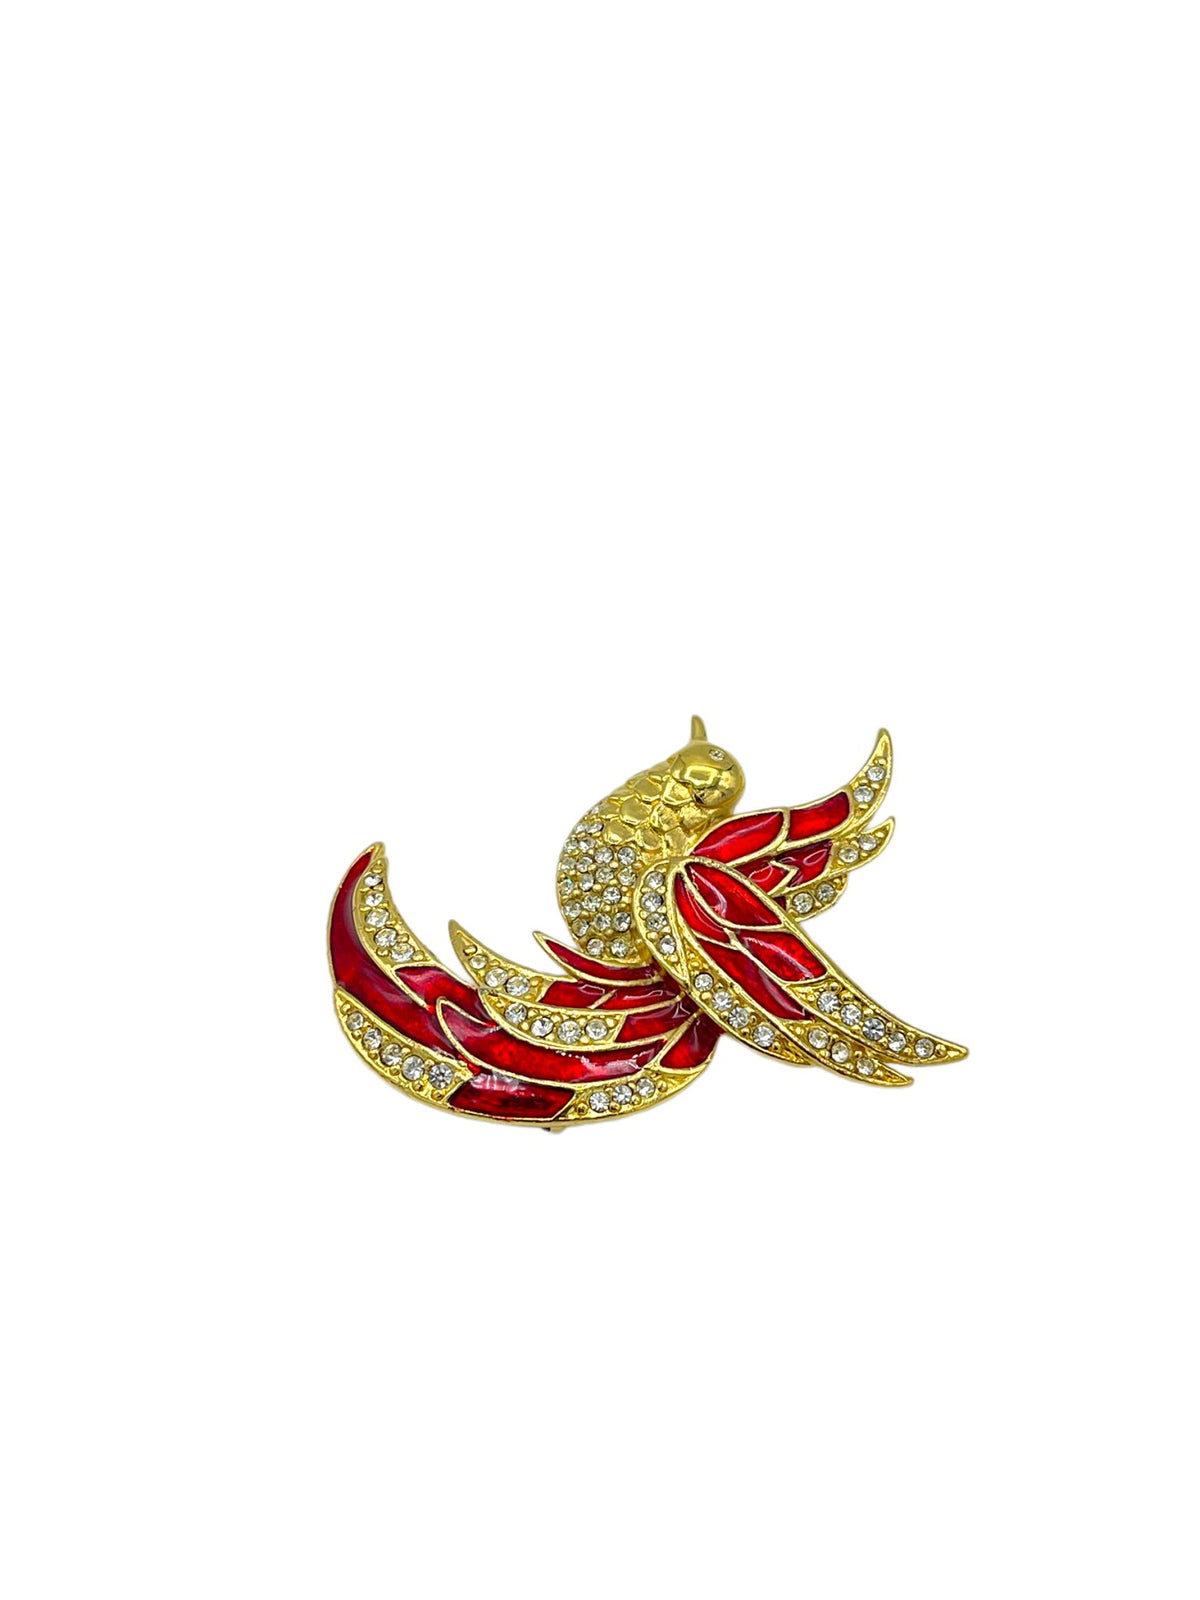 Giorgio Gold Red Enamel Bird of Paradise Vintage Designer Brooch - 24 Wishes Vintage Jewelry